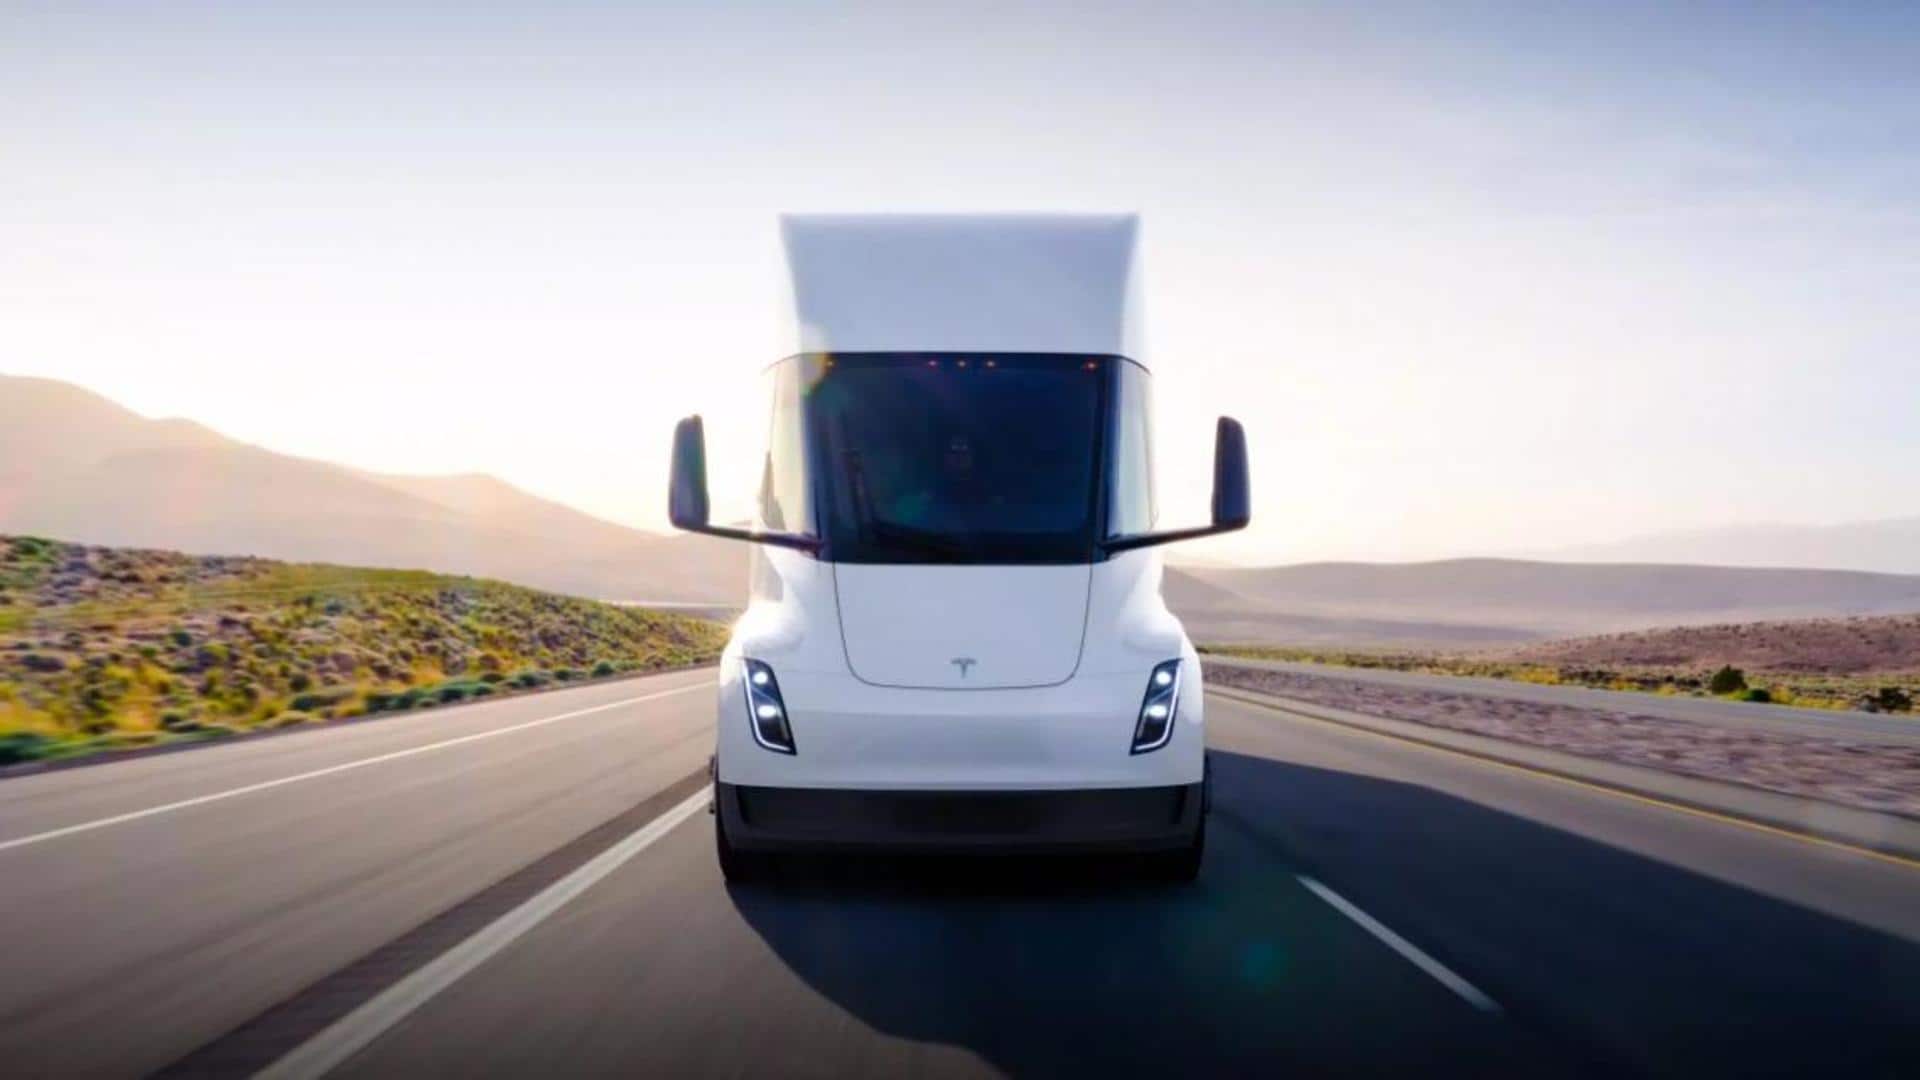 After 3-years of wait, Tesla delivers first Semi electric truck